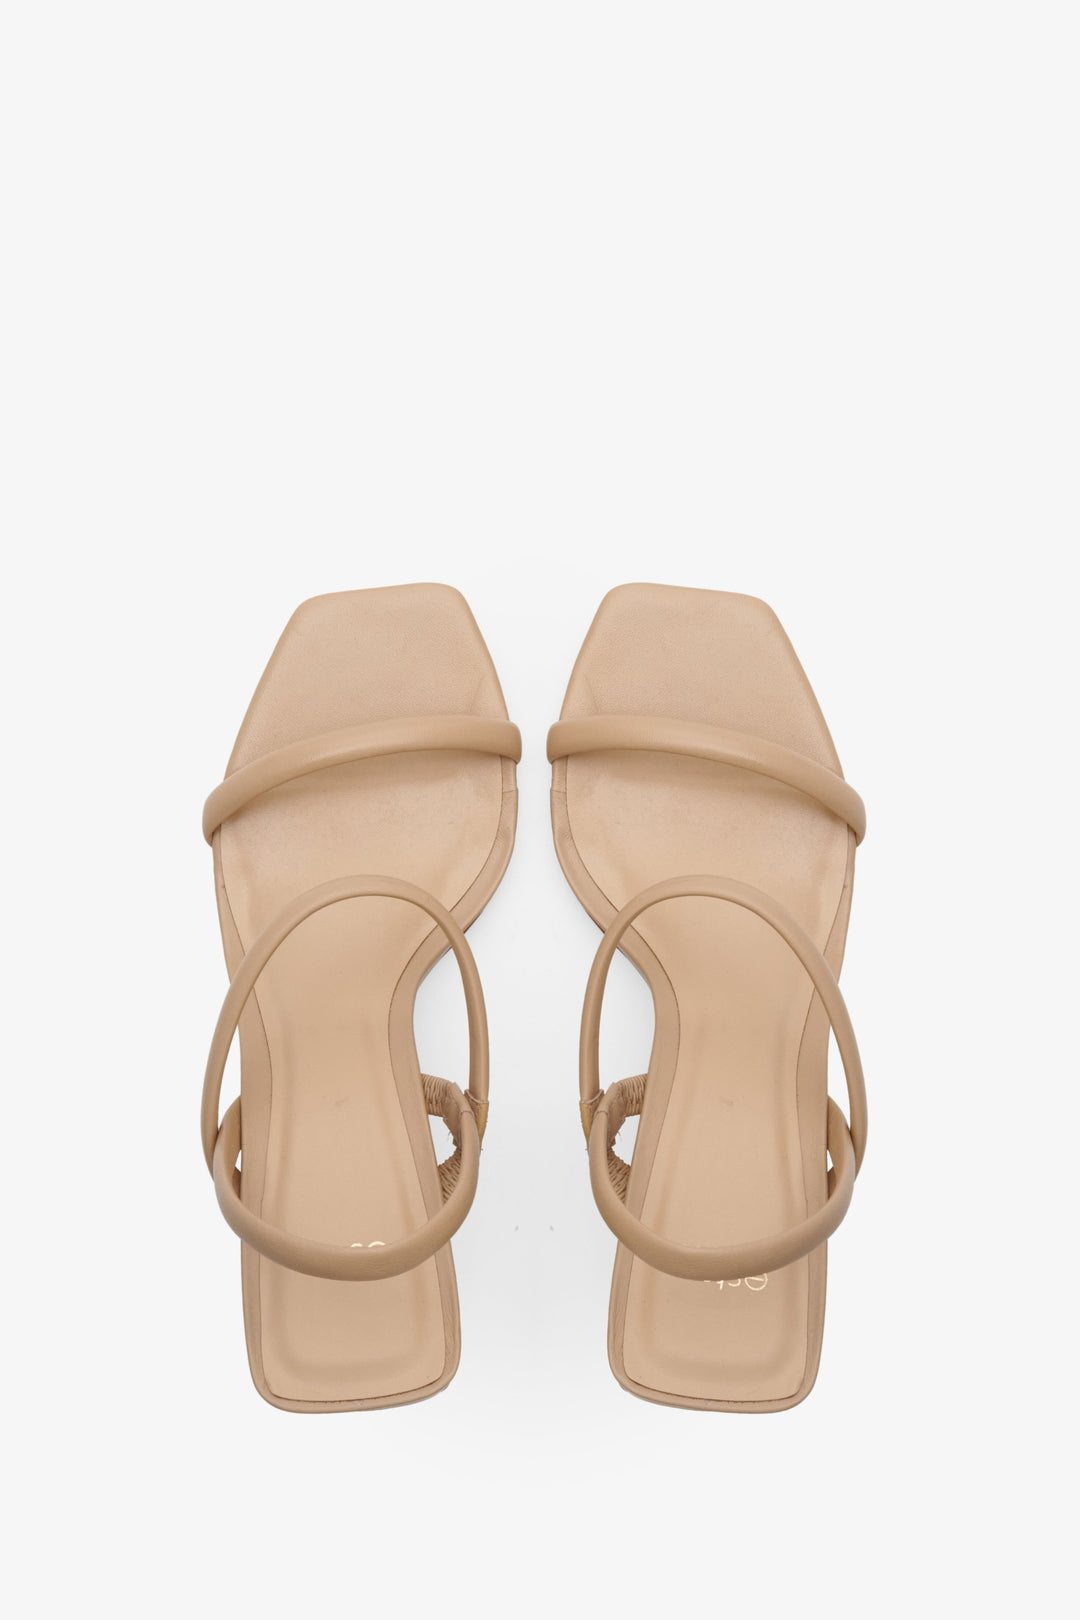 Leather, women's beige sandals with a stable heel by Estro - top view model presentation.